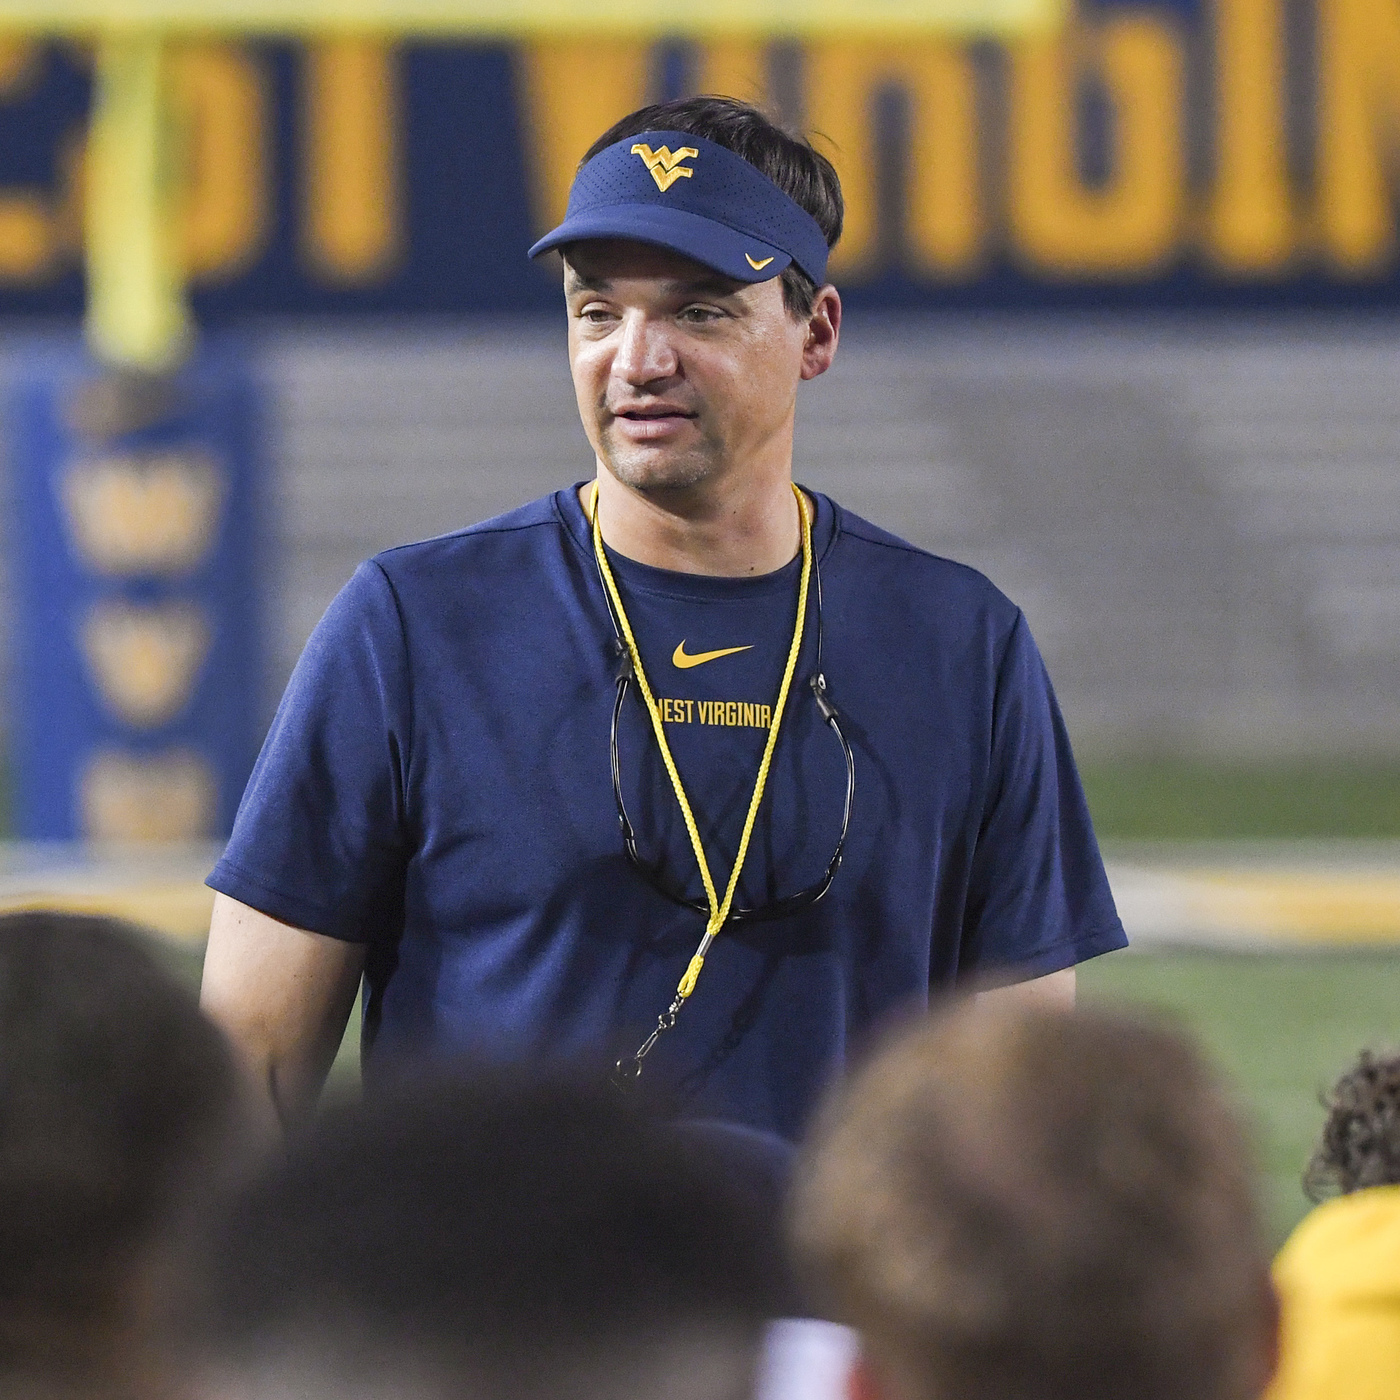 West Virginia coach Neal Brown Discusses First Practice of Fall Camp